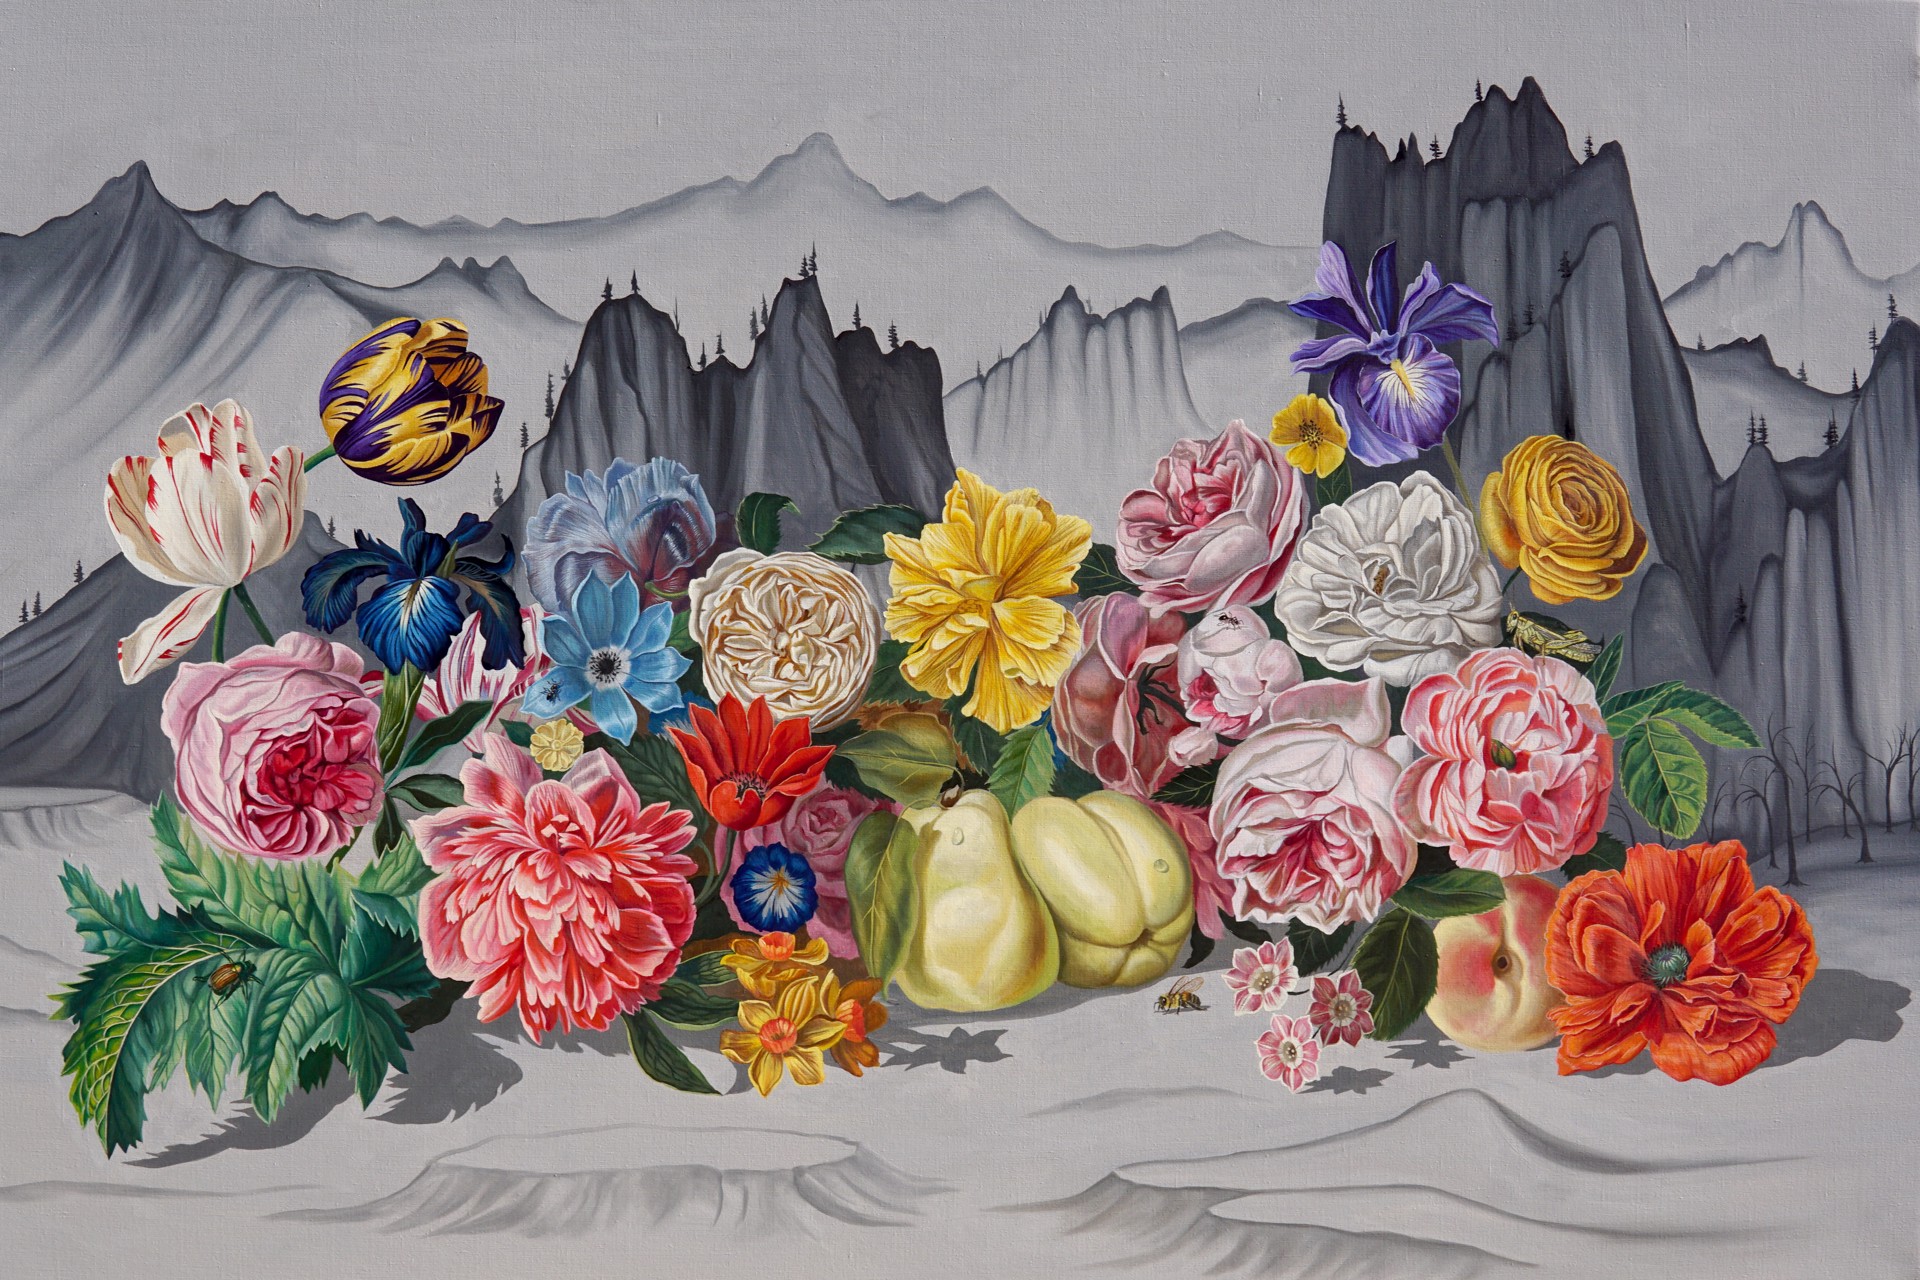 Colorful Flowers Growing out of Grey Mountains by Robin Hextrum